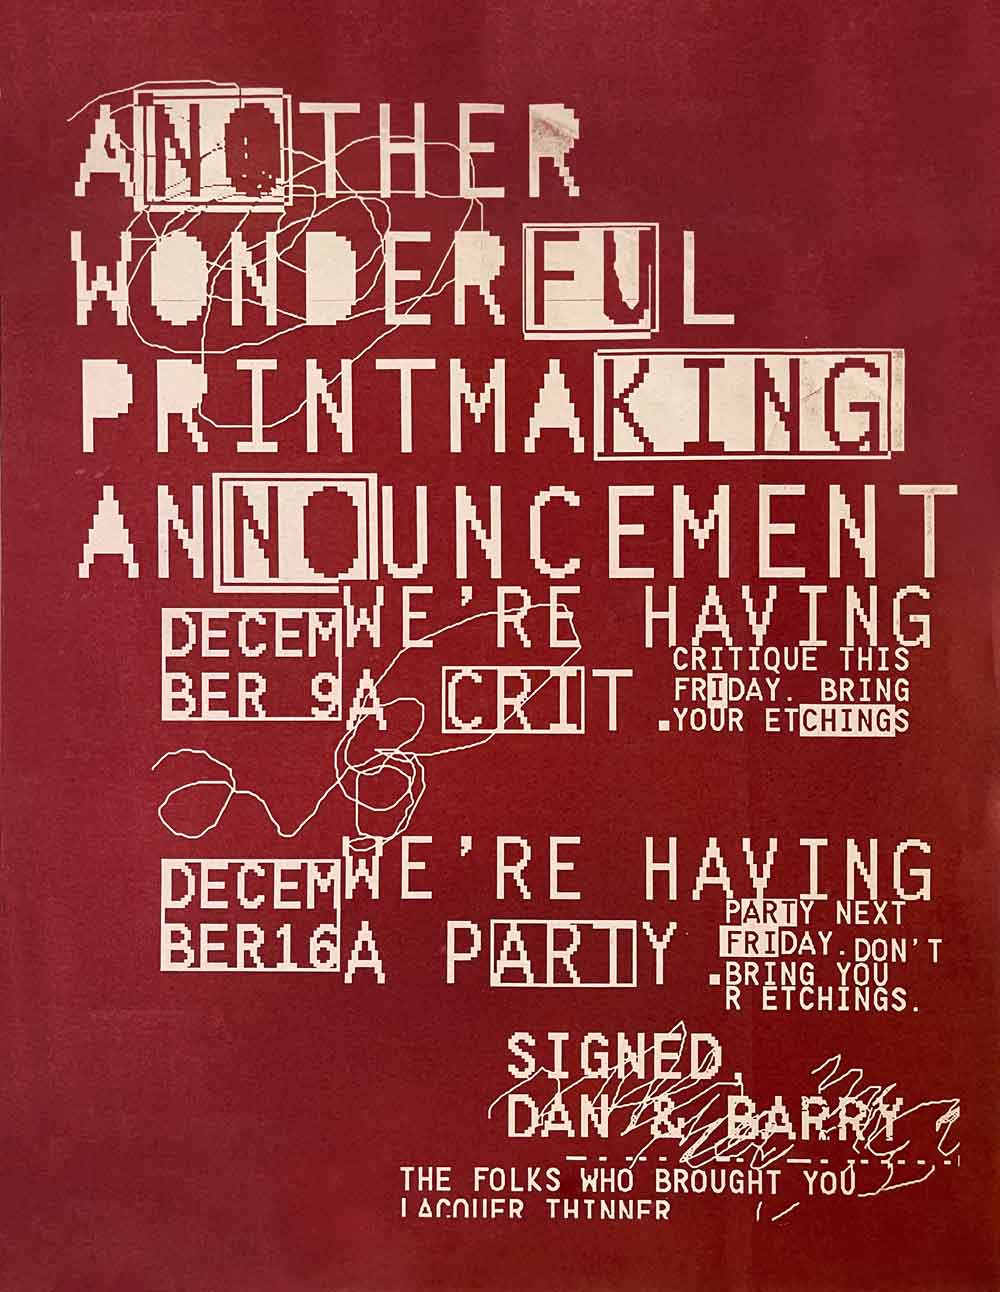 Printmaking Party & Crit Poster, 1988